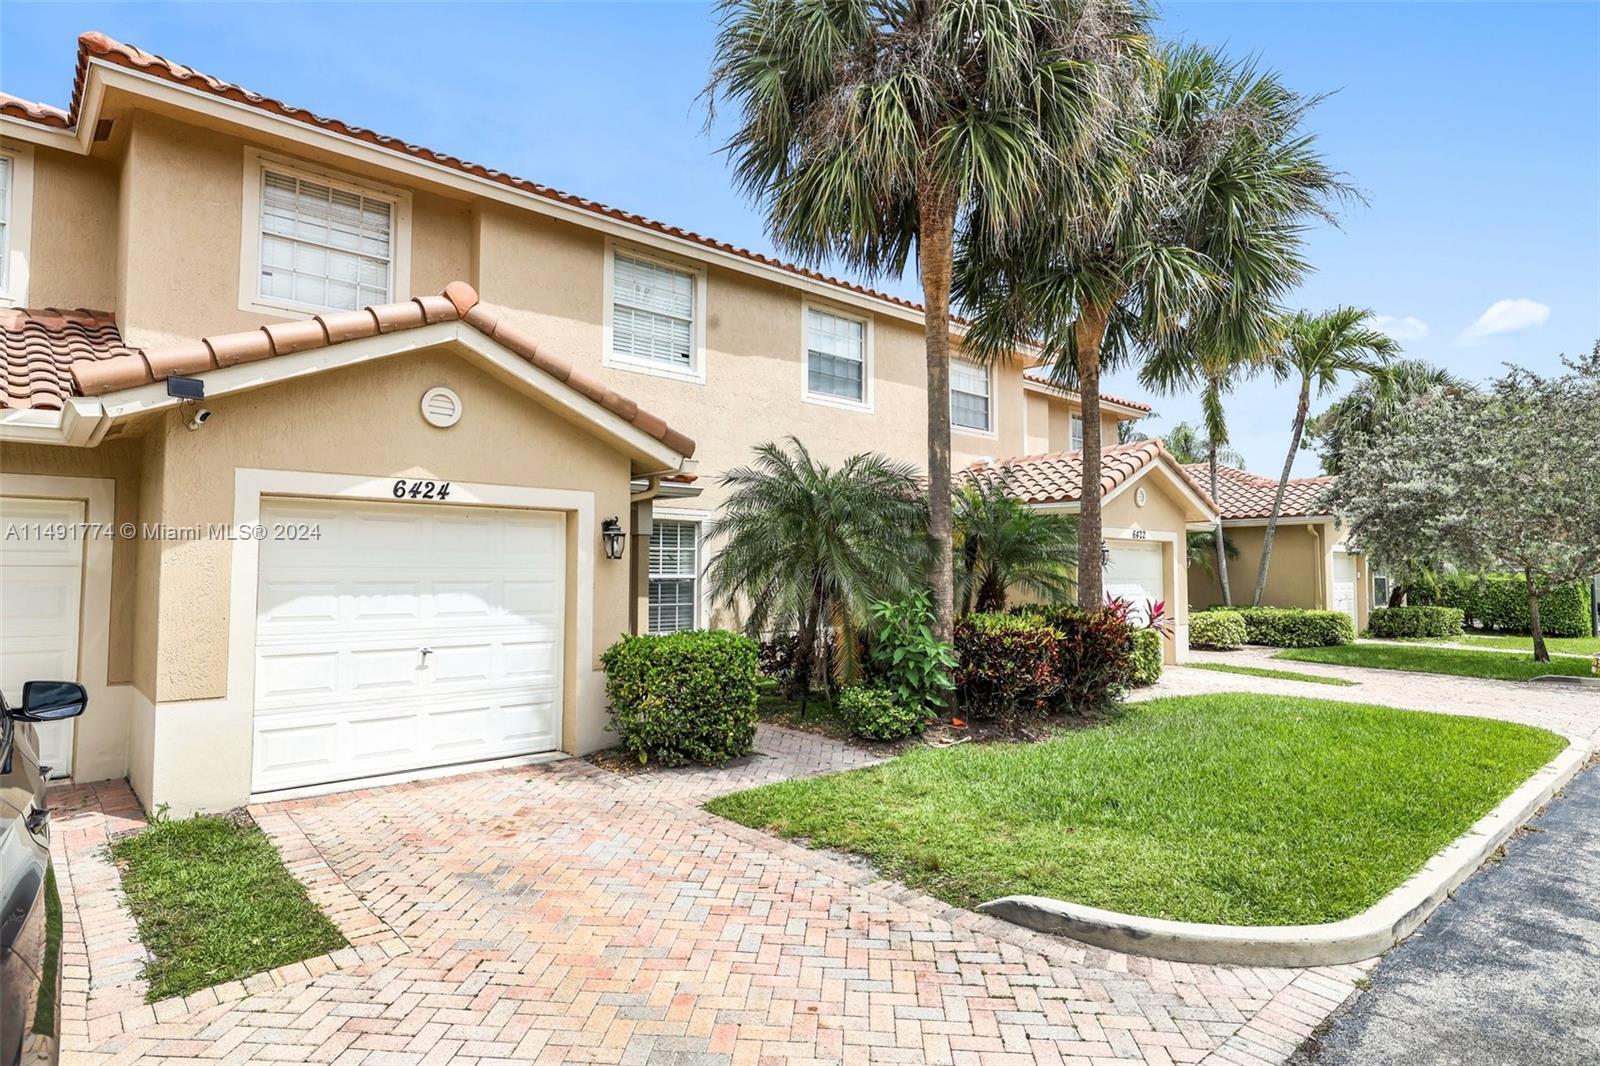 Welcome to your new home in the heart of Boynton Beach. This inviting 3-bedroom home offers a conven